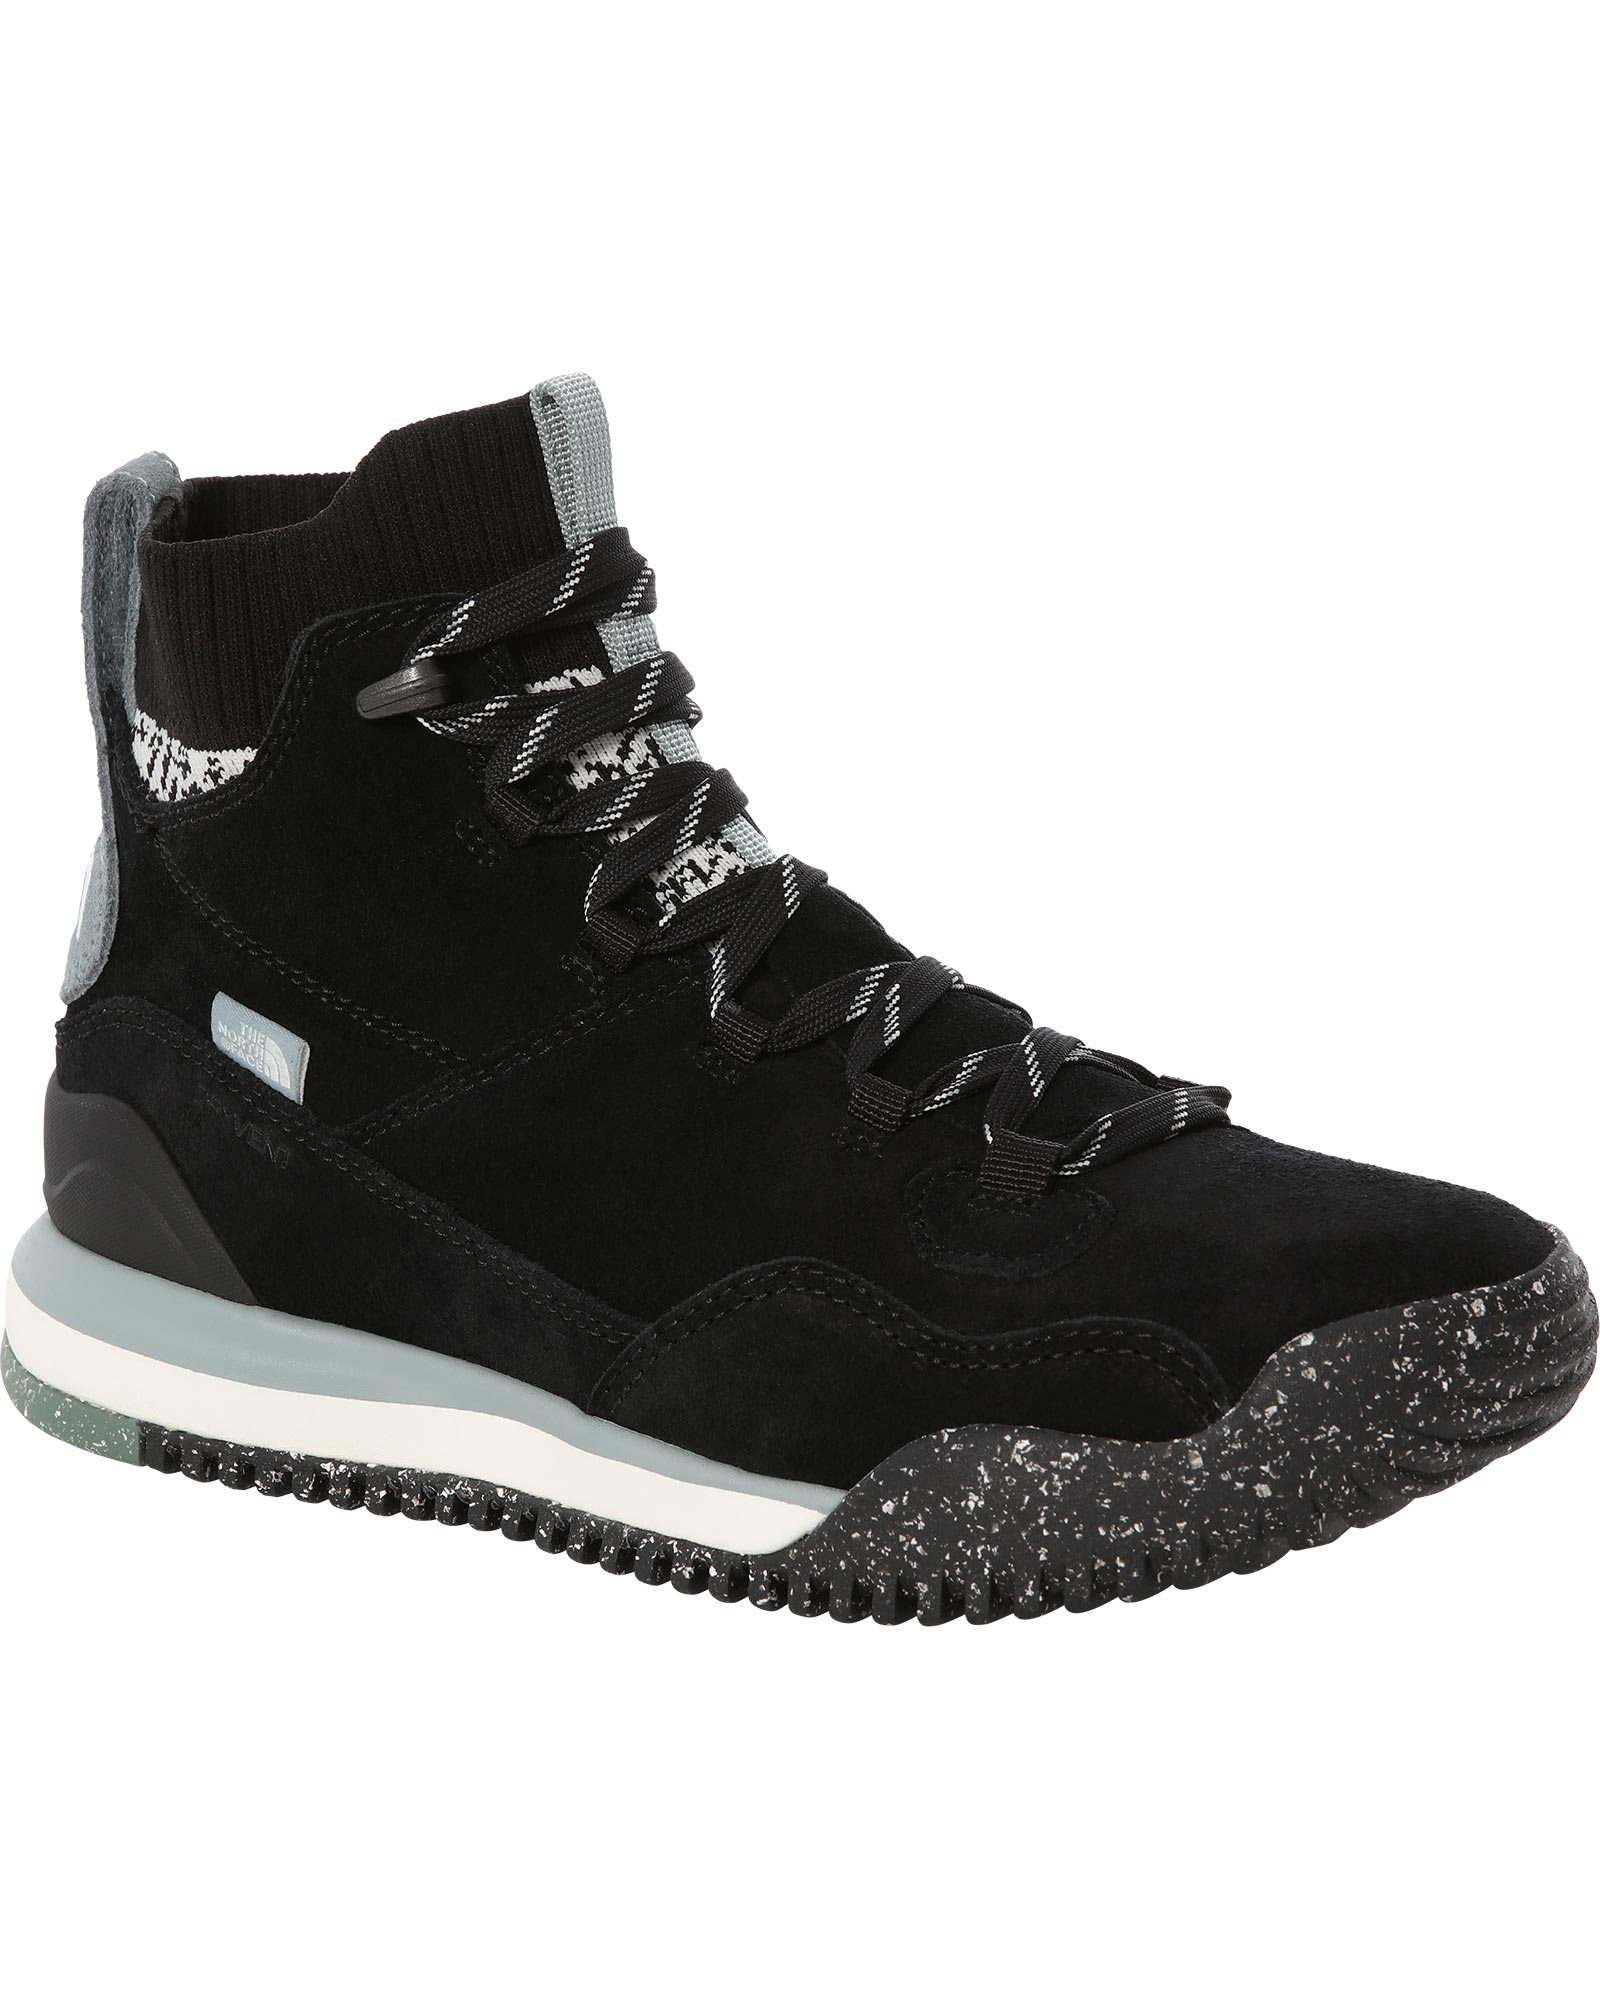 The North Face Back-to-berkeley Iii Sport Womens Waterproof Boots